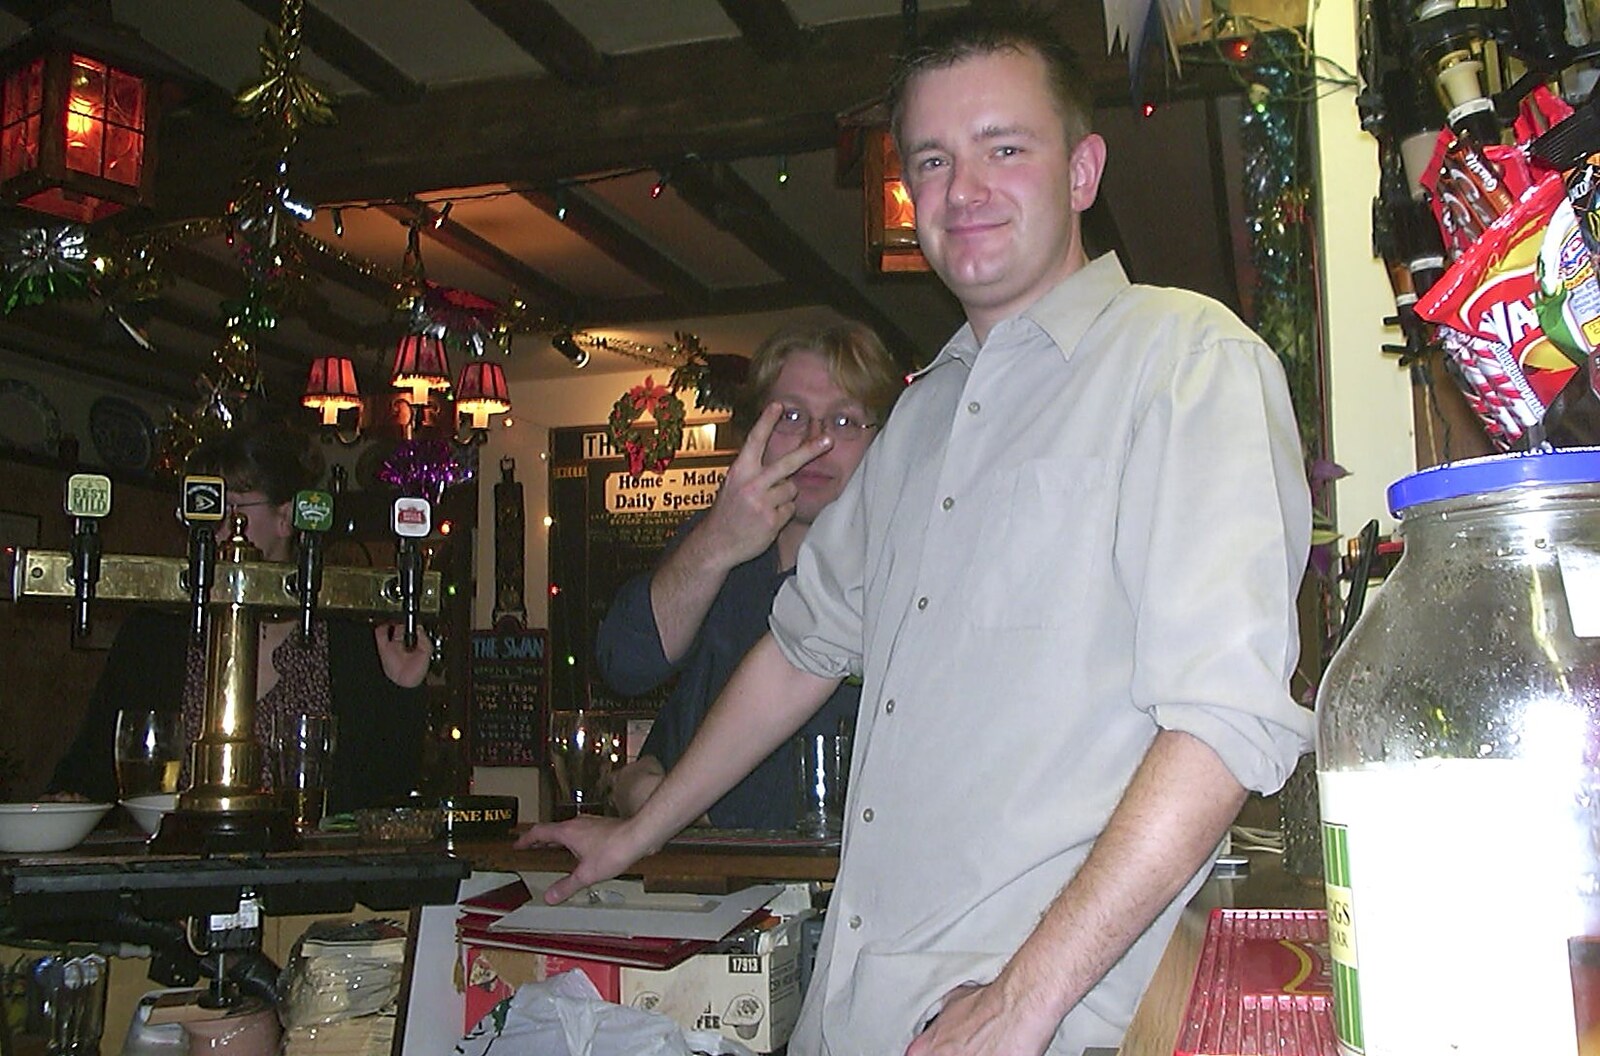 Nosher behind the bar from Christmas Day at Nosher's, Brome, Suffolk - 25th December 2002